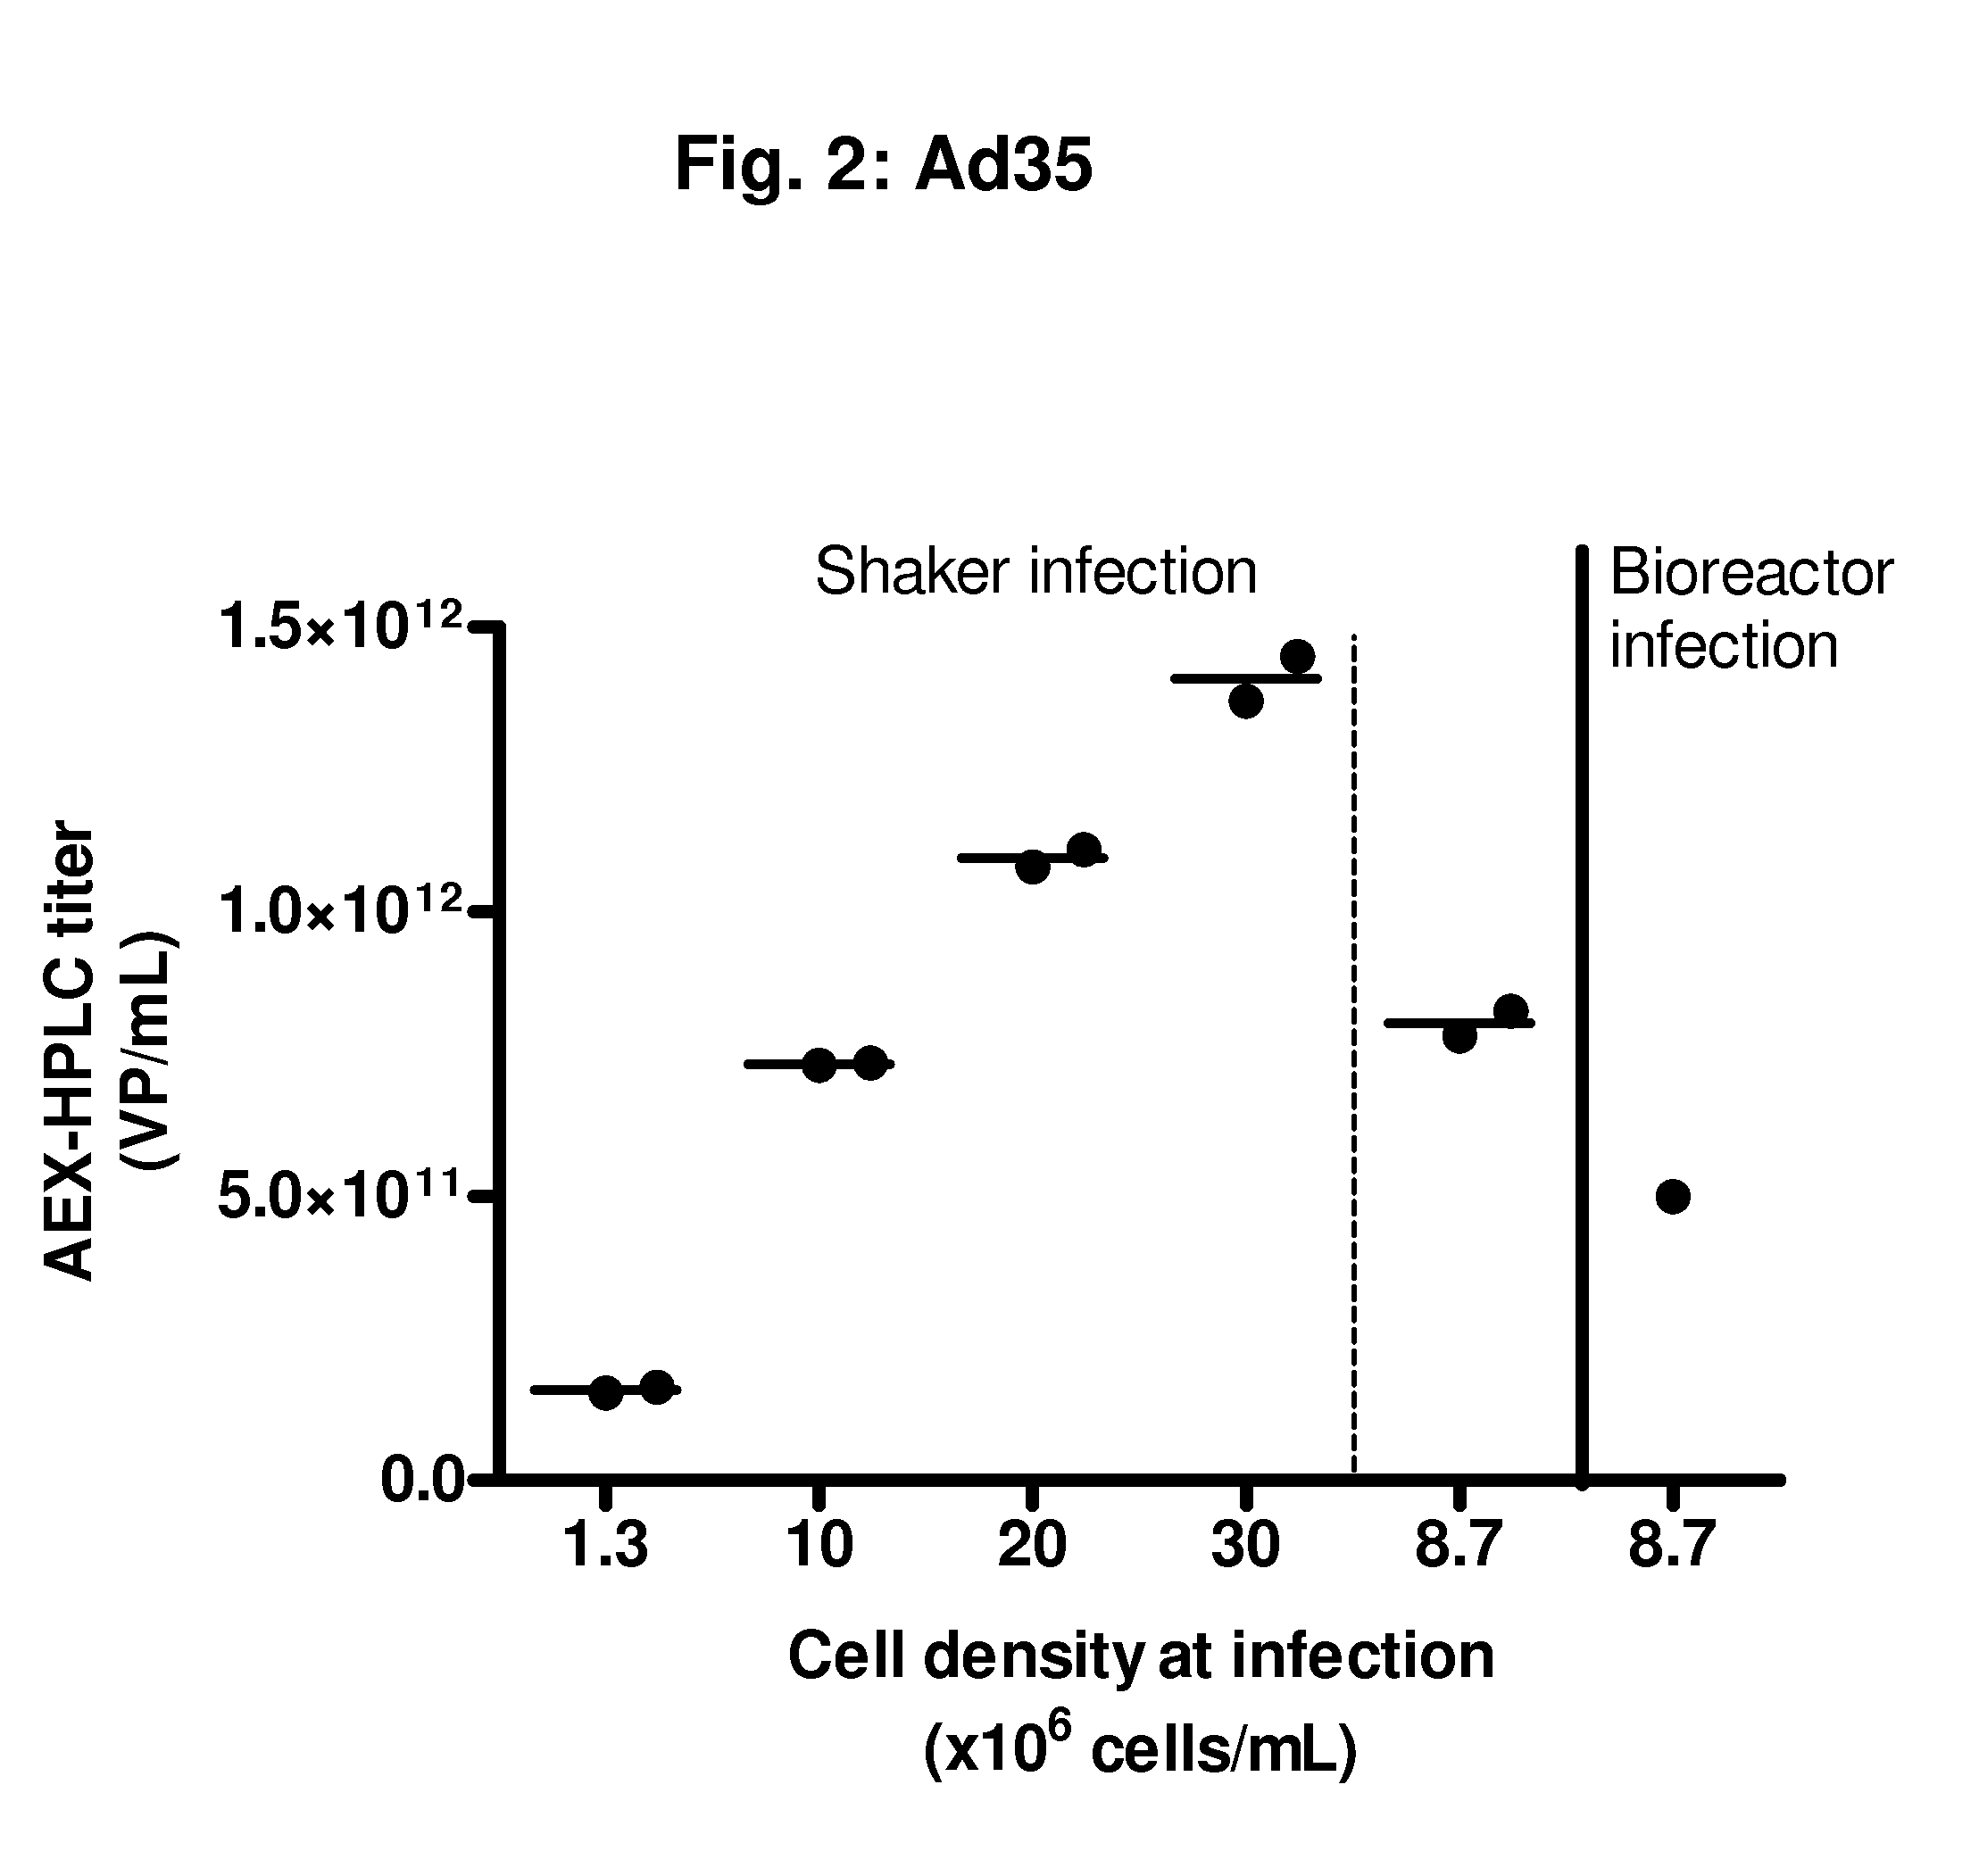 METHOD FOR THE PRODUCTION OF Ad26 ADENOVIRAL VECTORS